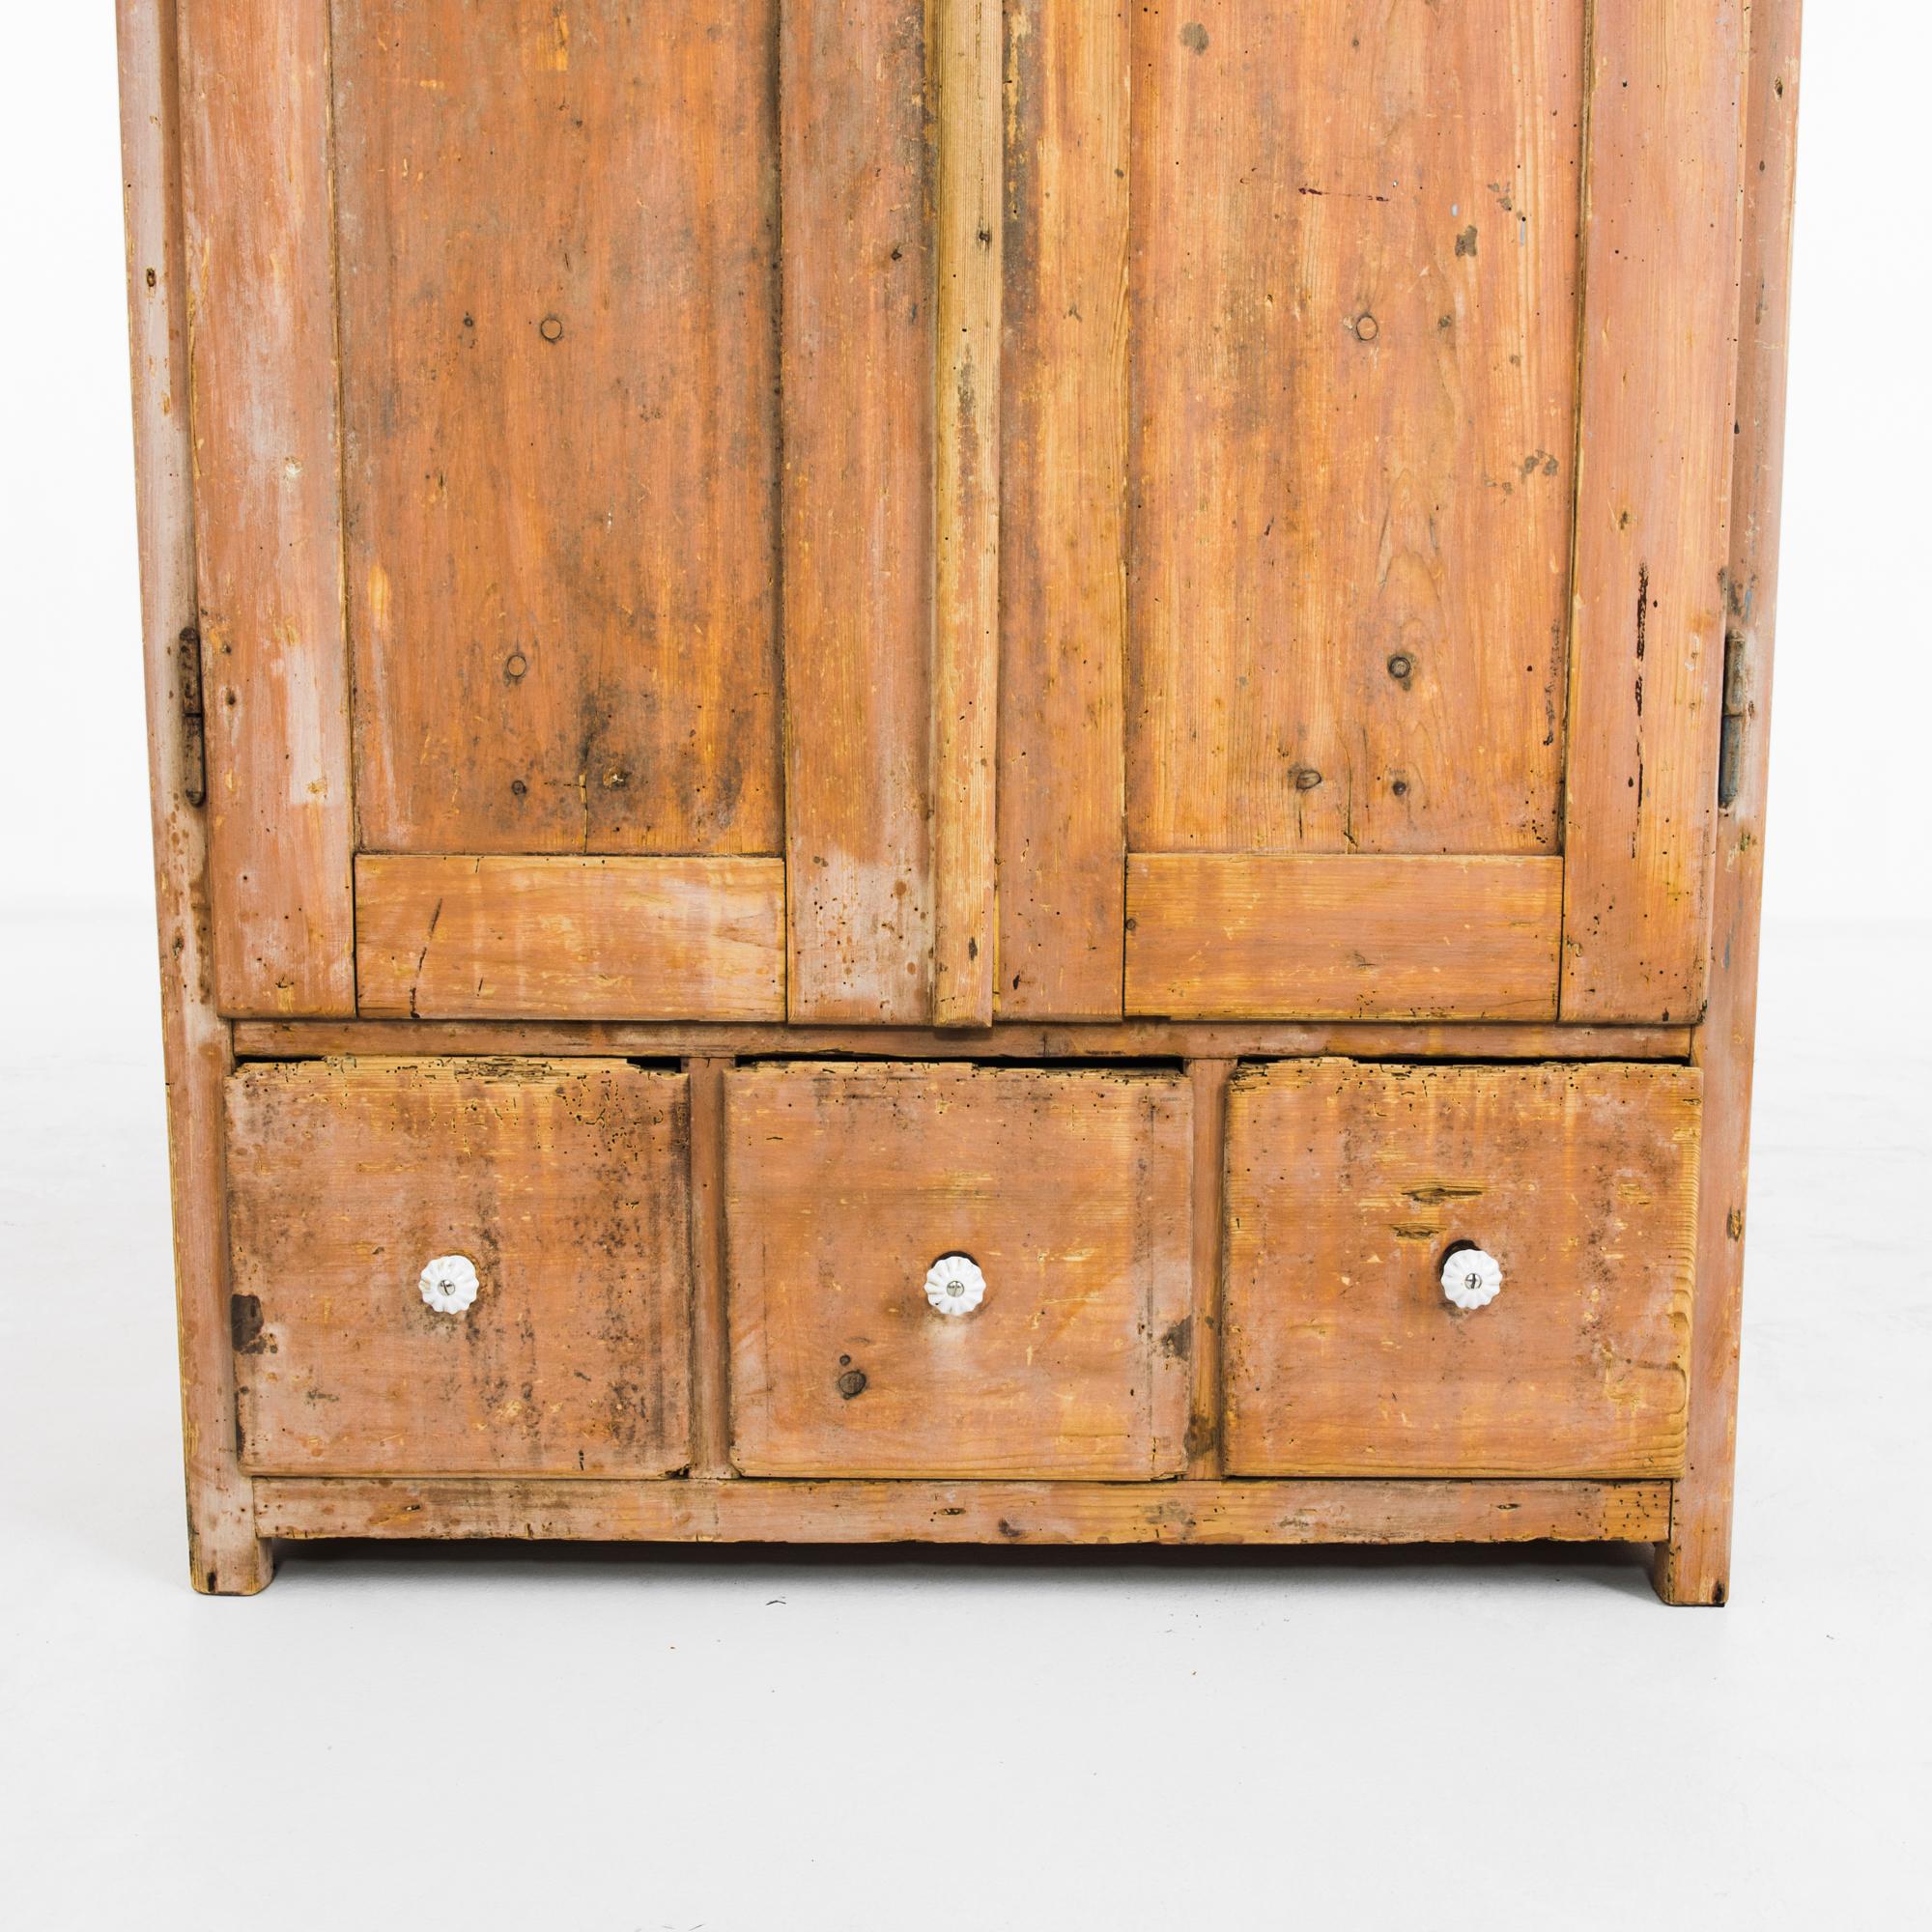 1880s Czech Wooden Cabinet with Original Patina 2